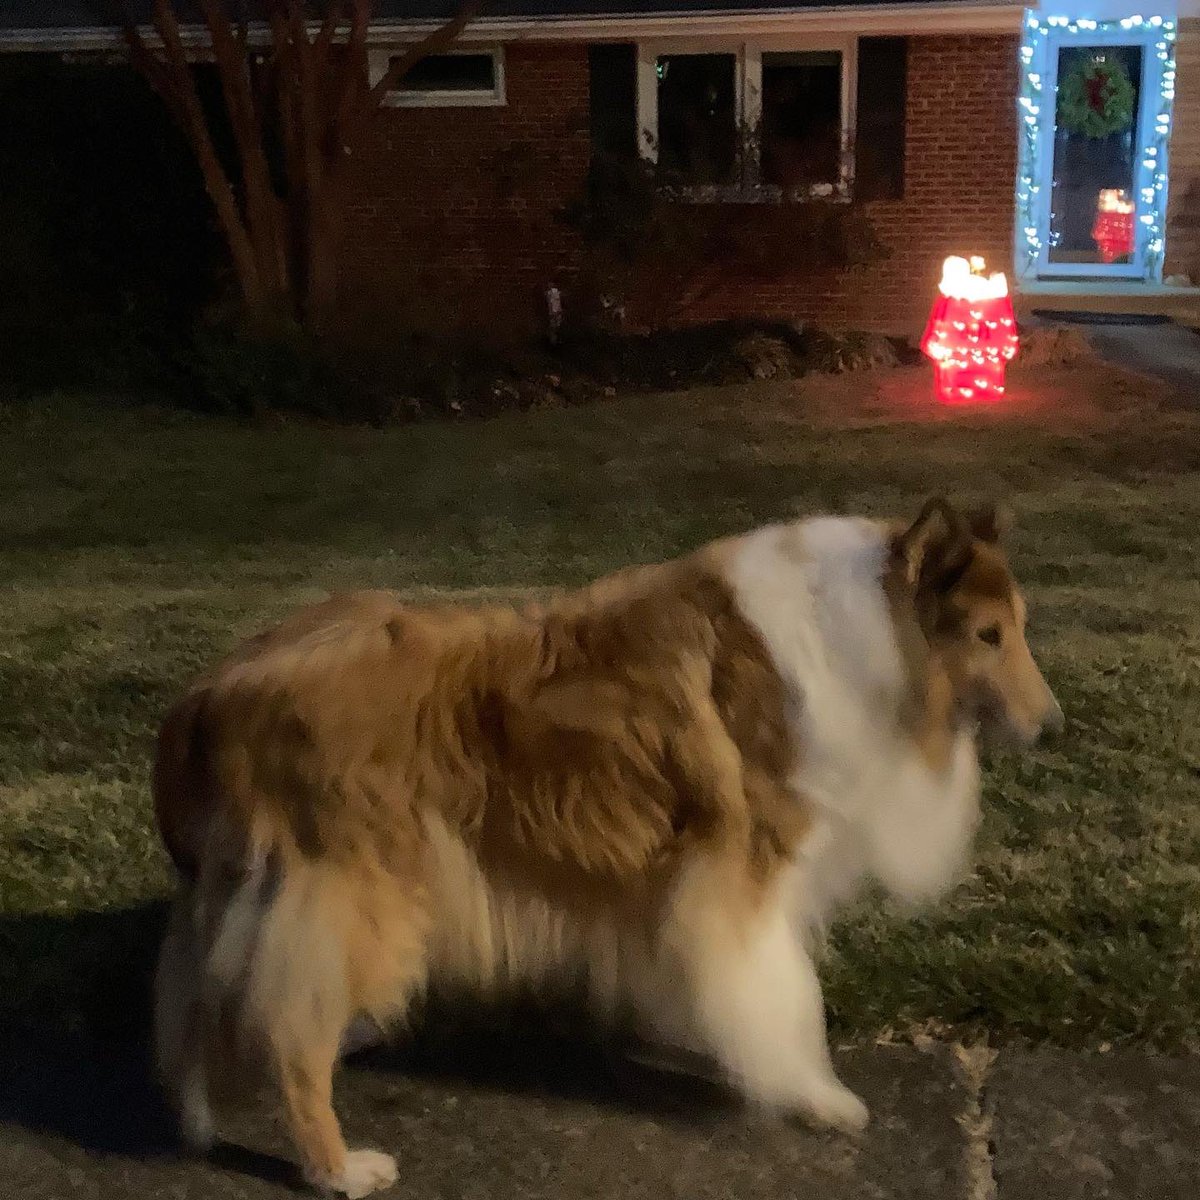 This 🕵️‍♀️ snoop 🐕 dog isn’t done hunting 🔍 for #holidaydecorations and found Snoopy 🐶 brightening up the block. 

#keepthelightsupallyear #roughcollie #collie #snoopy